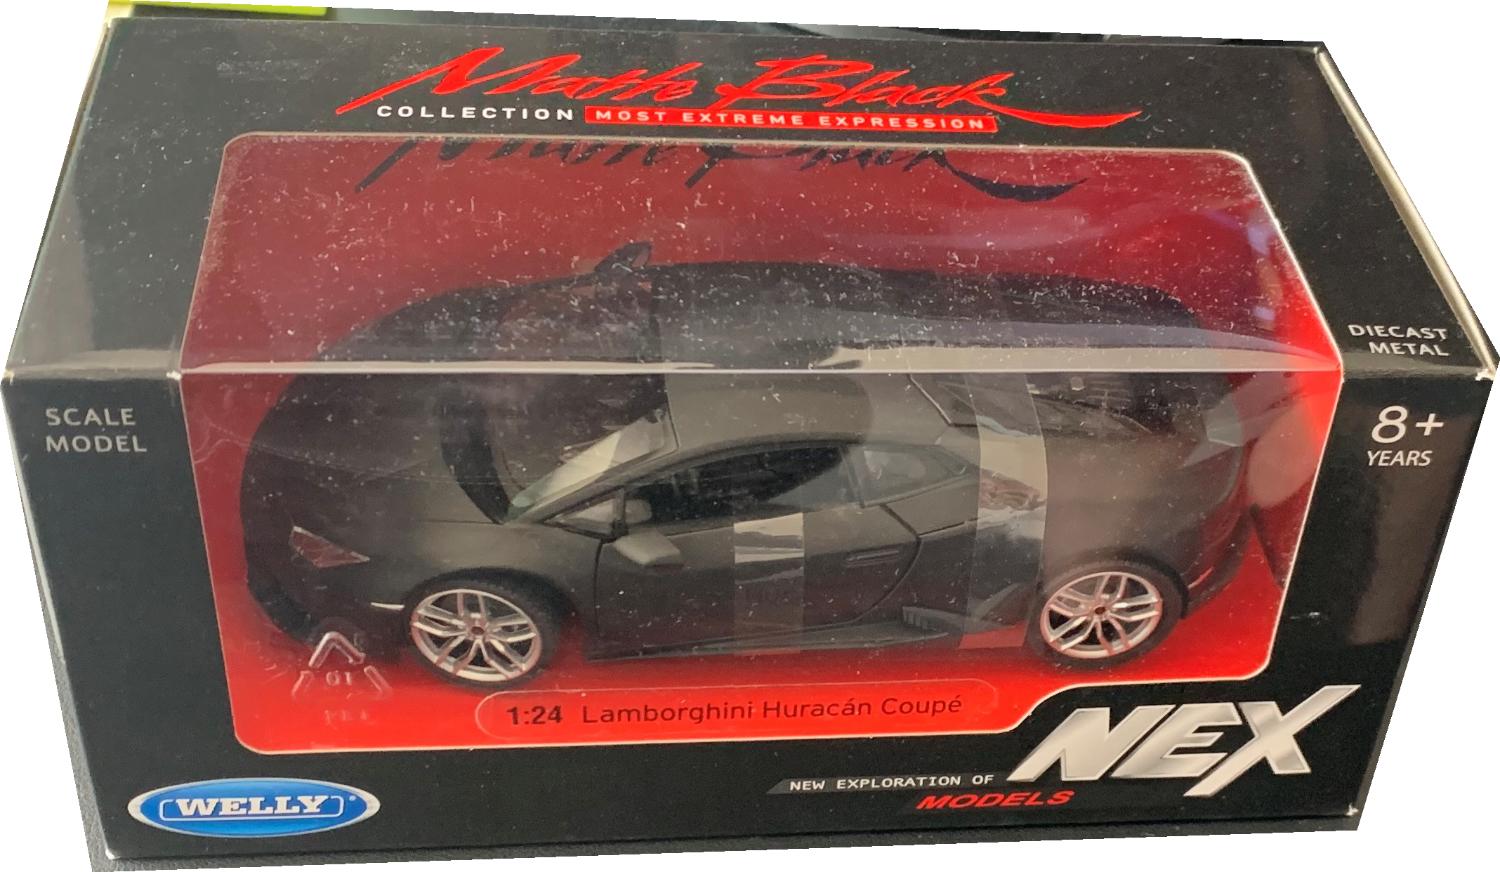 Lamborghini Huracan Coupe in matt black 1:24 scale diecast model supercar from Welly